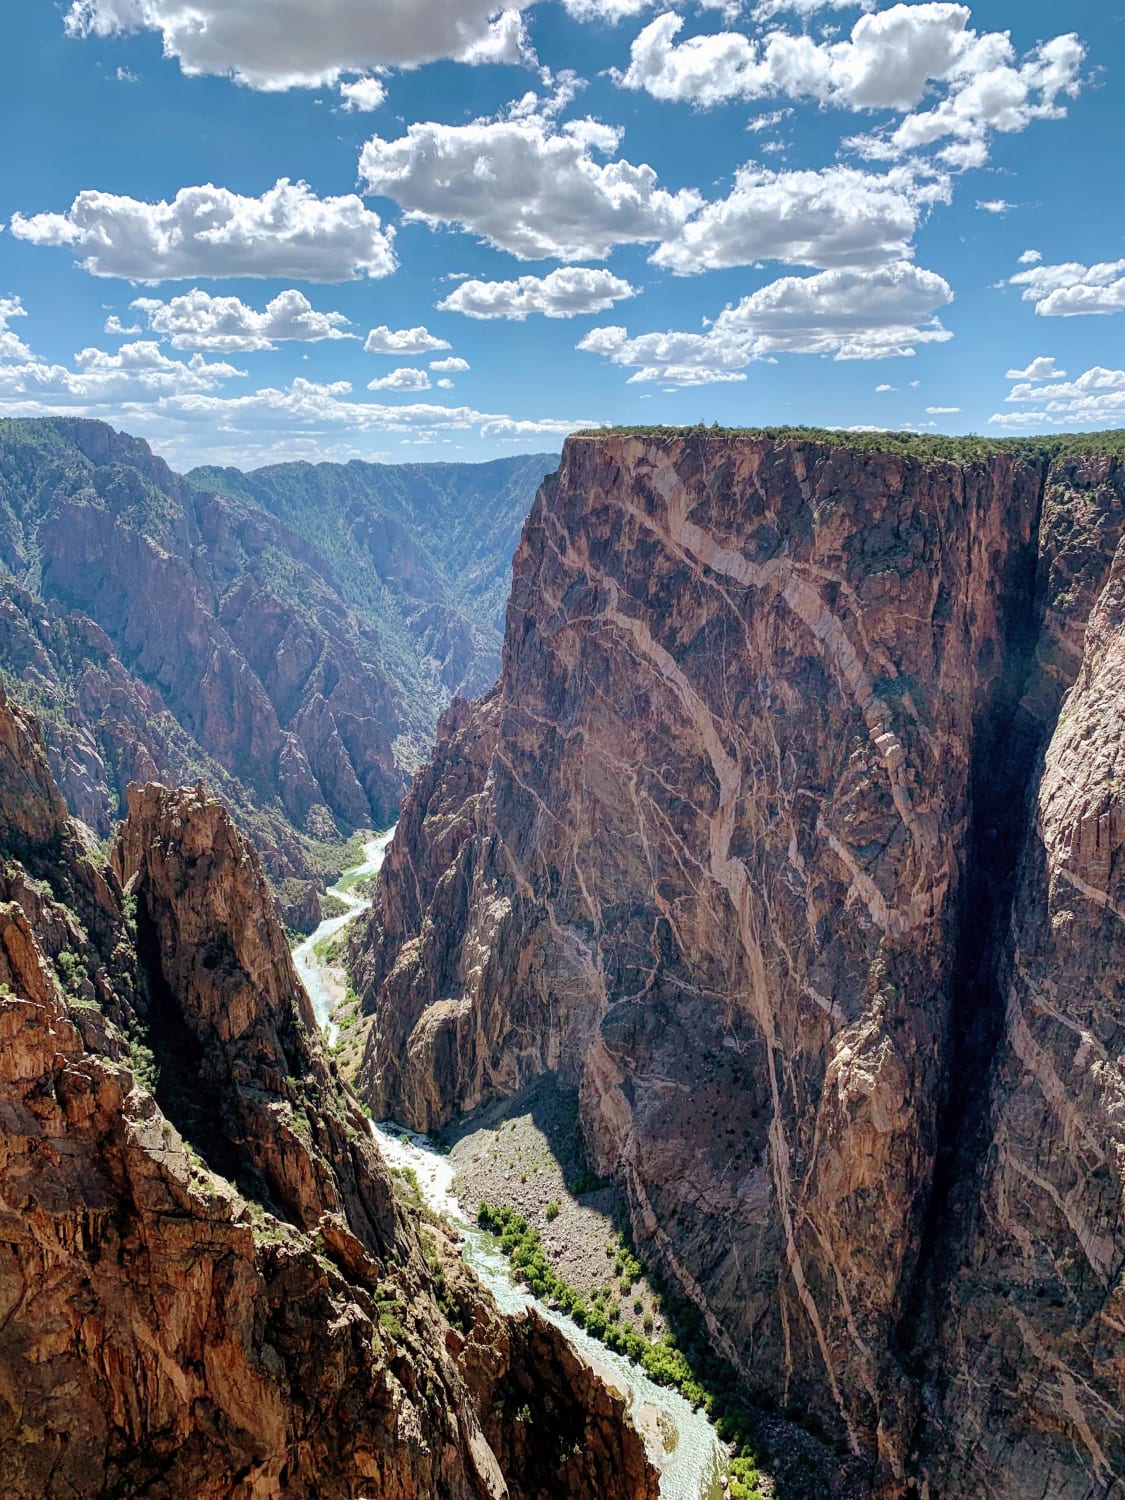 Painted Wall @ Black Canyon of the Gunnison National Park. 2250 ft of sheer beauty